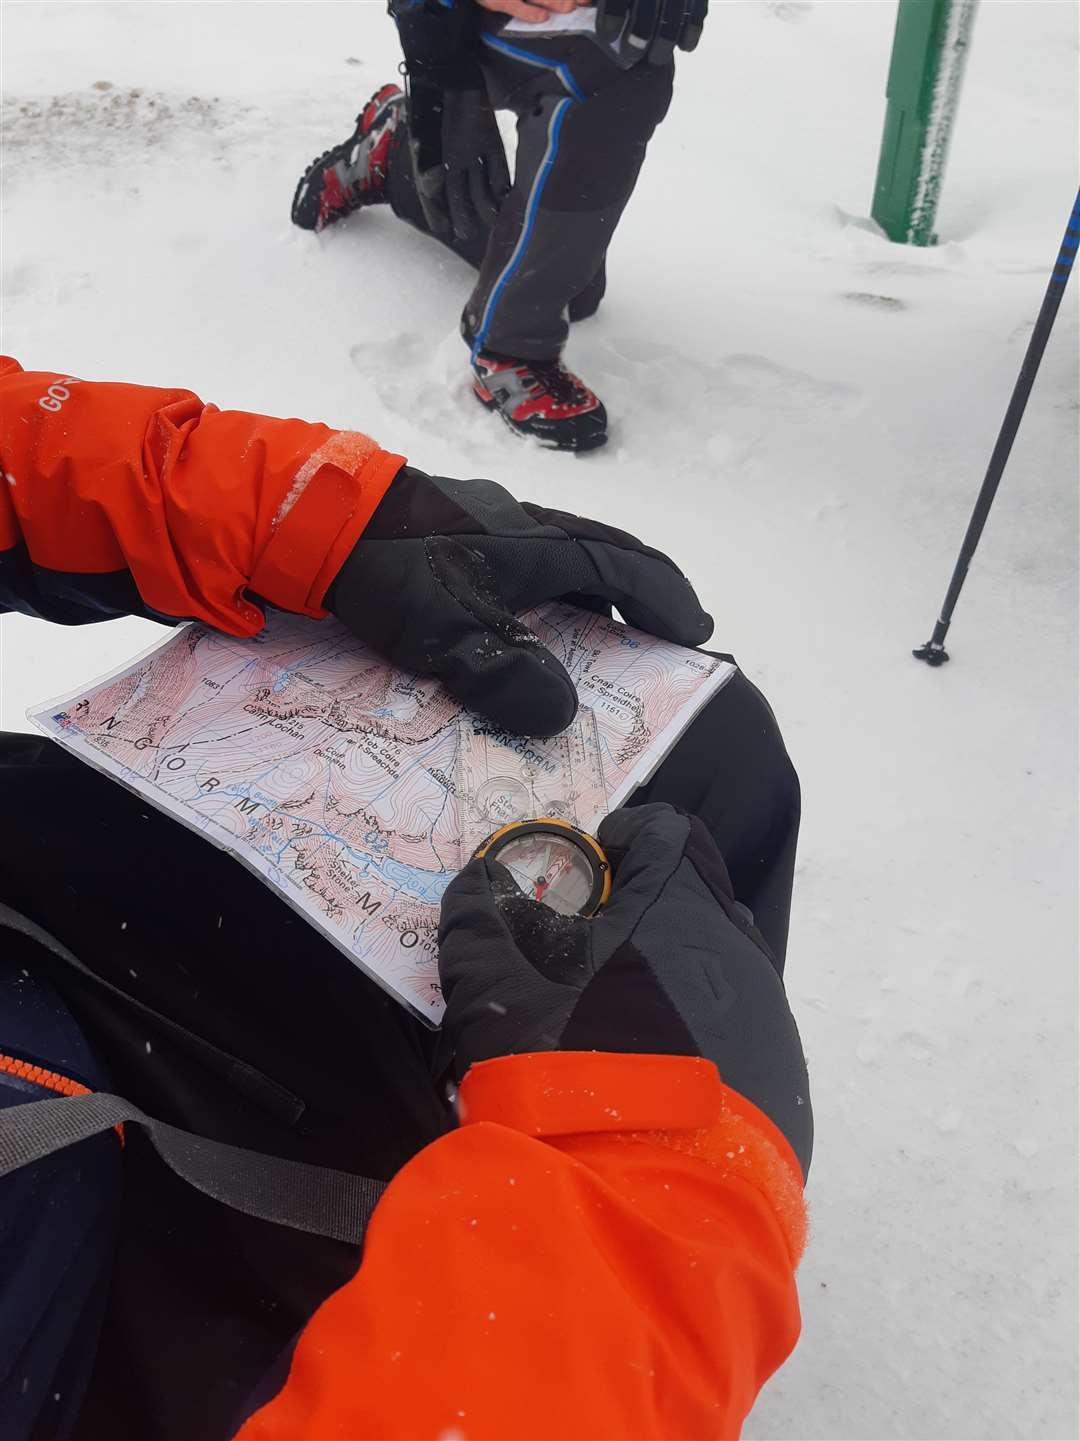 Navigation is more difficult in winter.